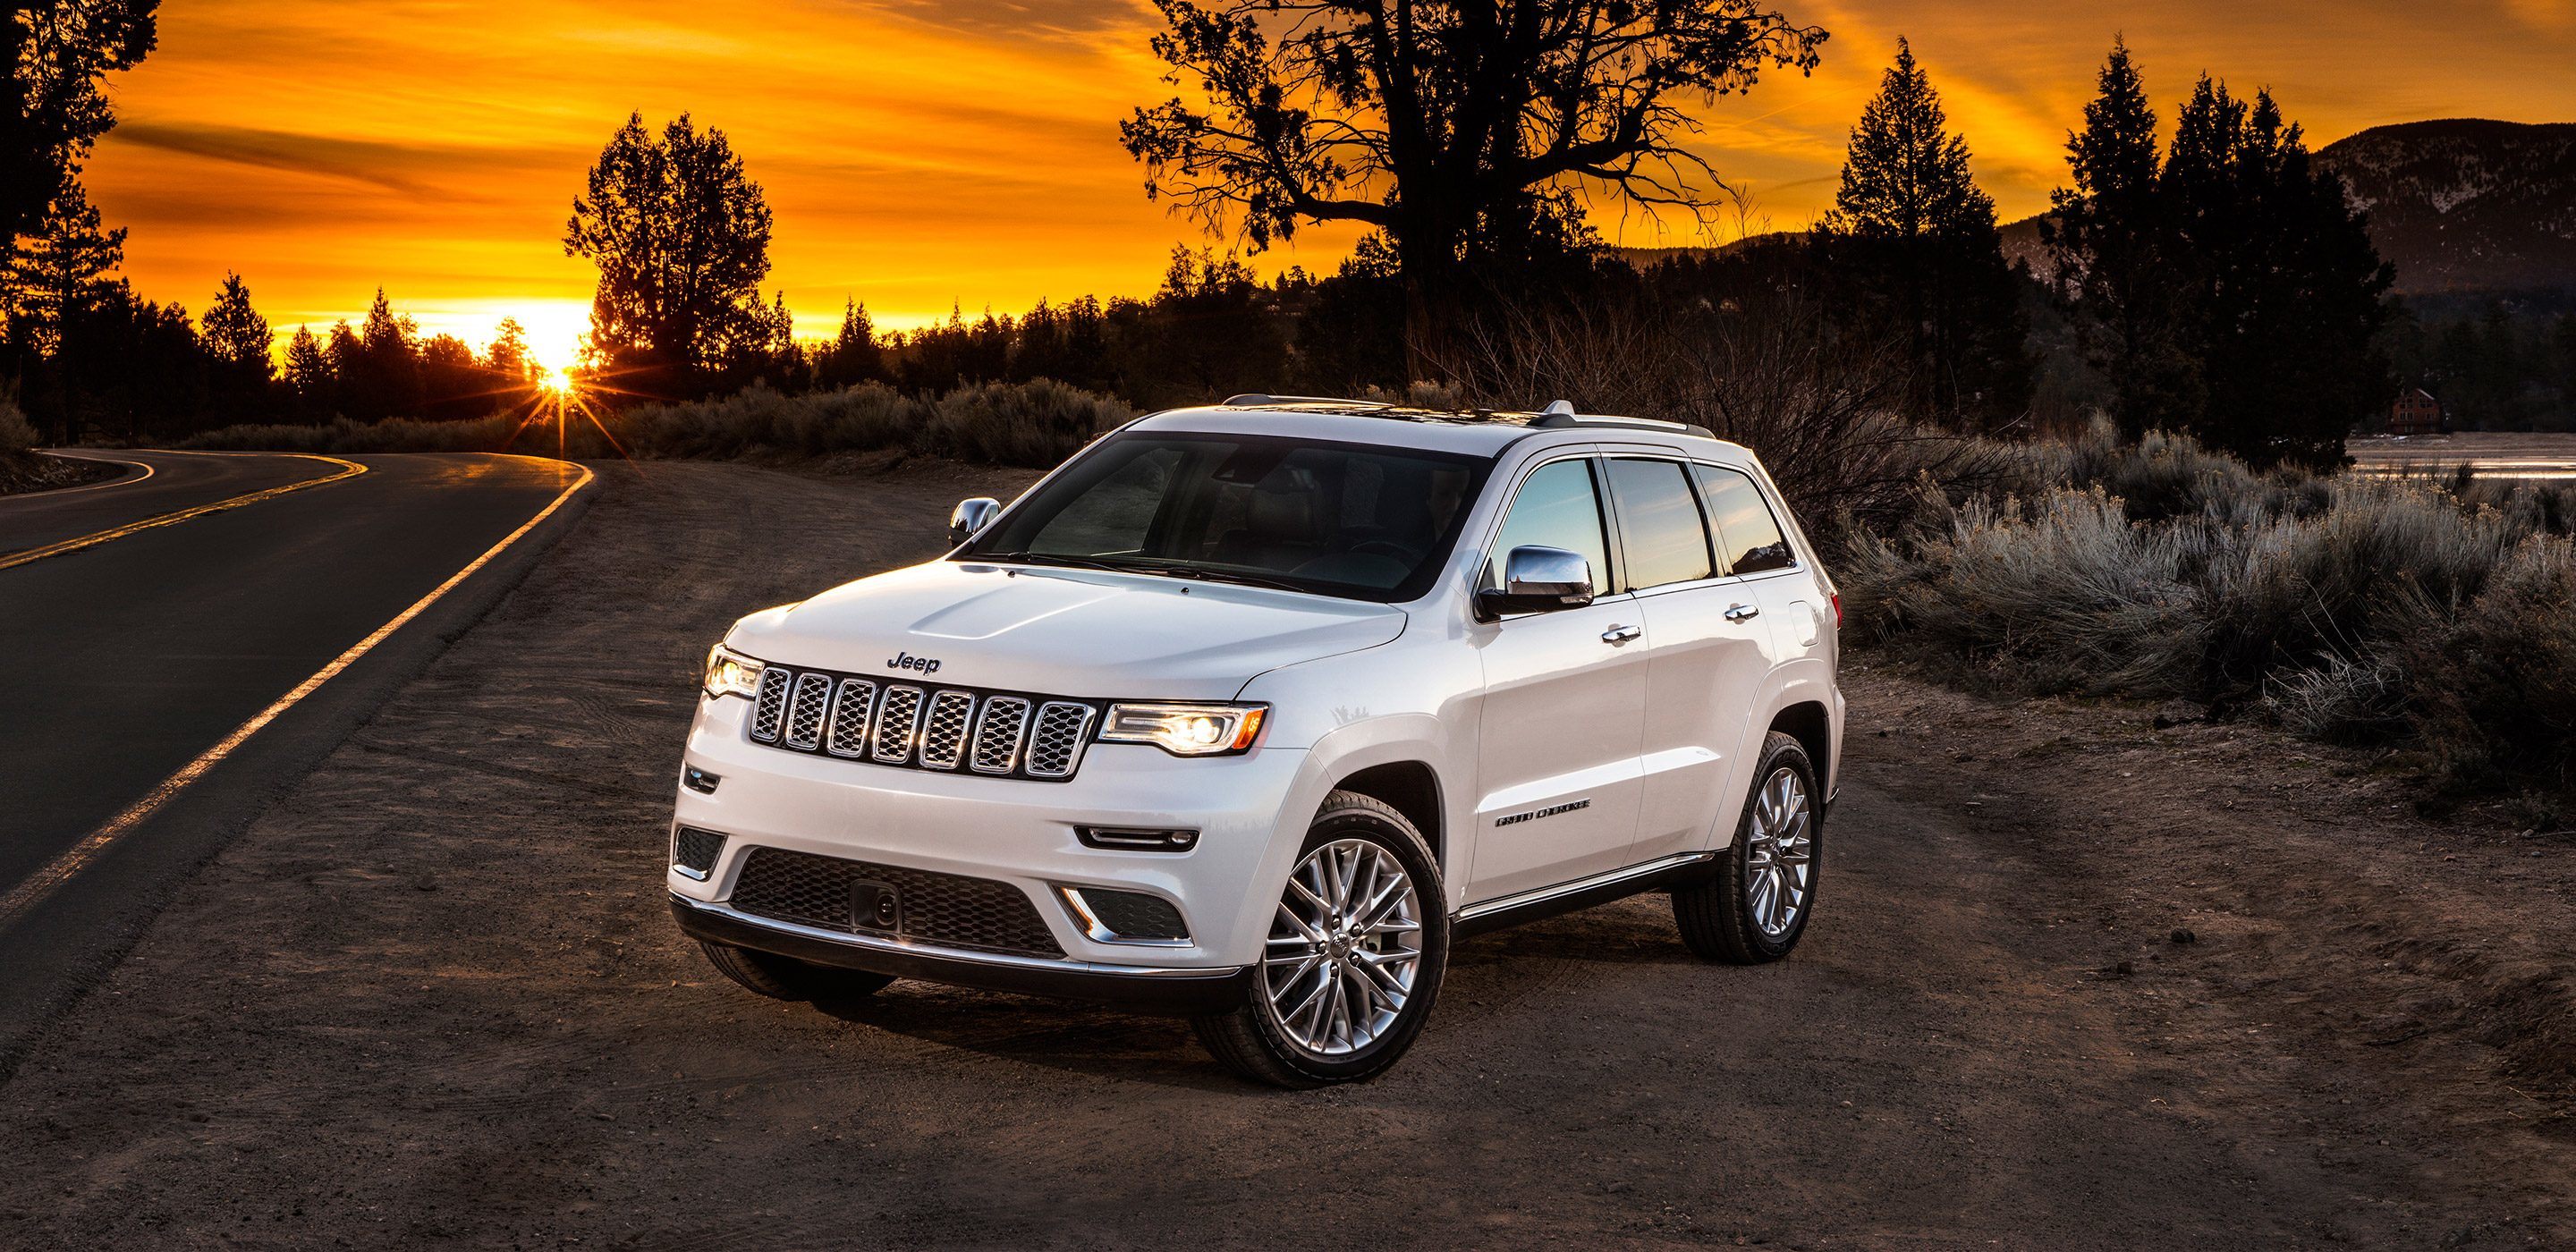 2018 Jeep Grand Cherokee SUV white exterior front view